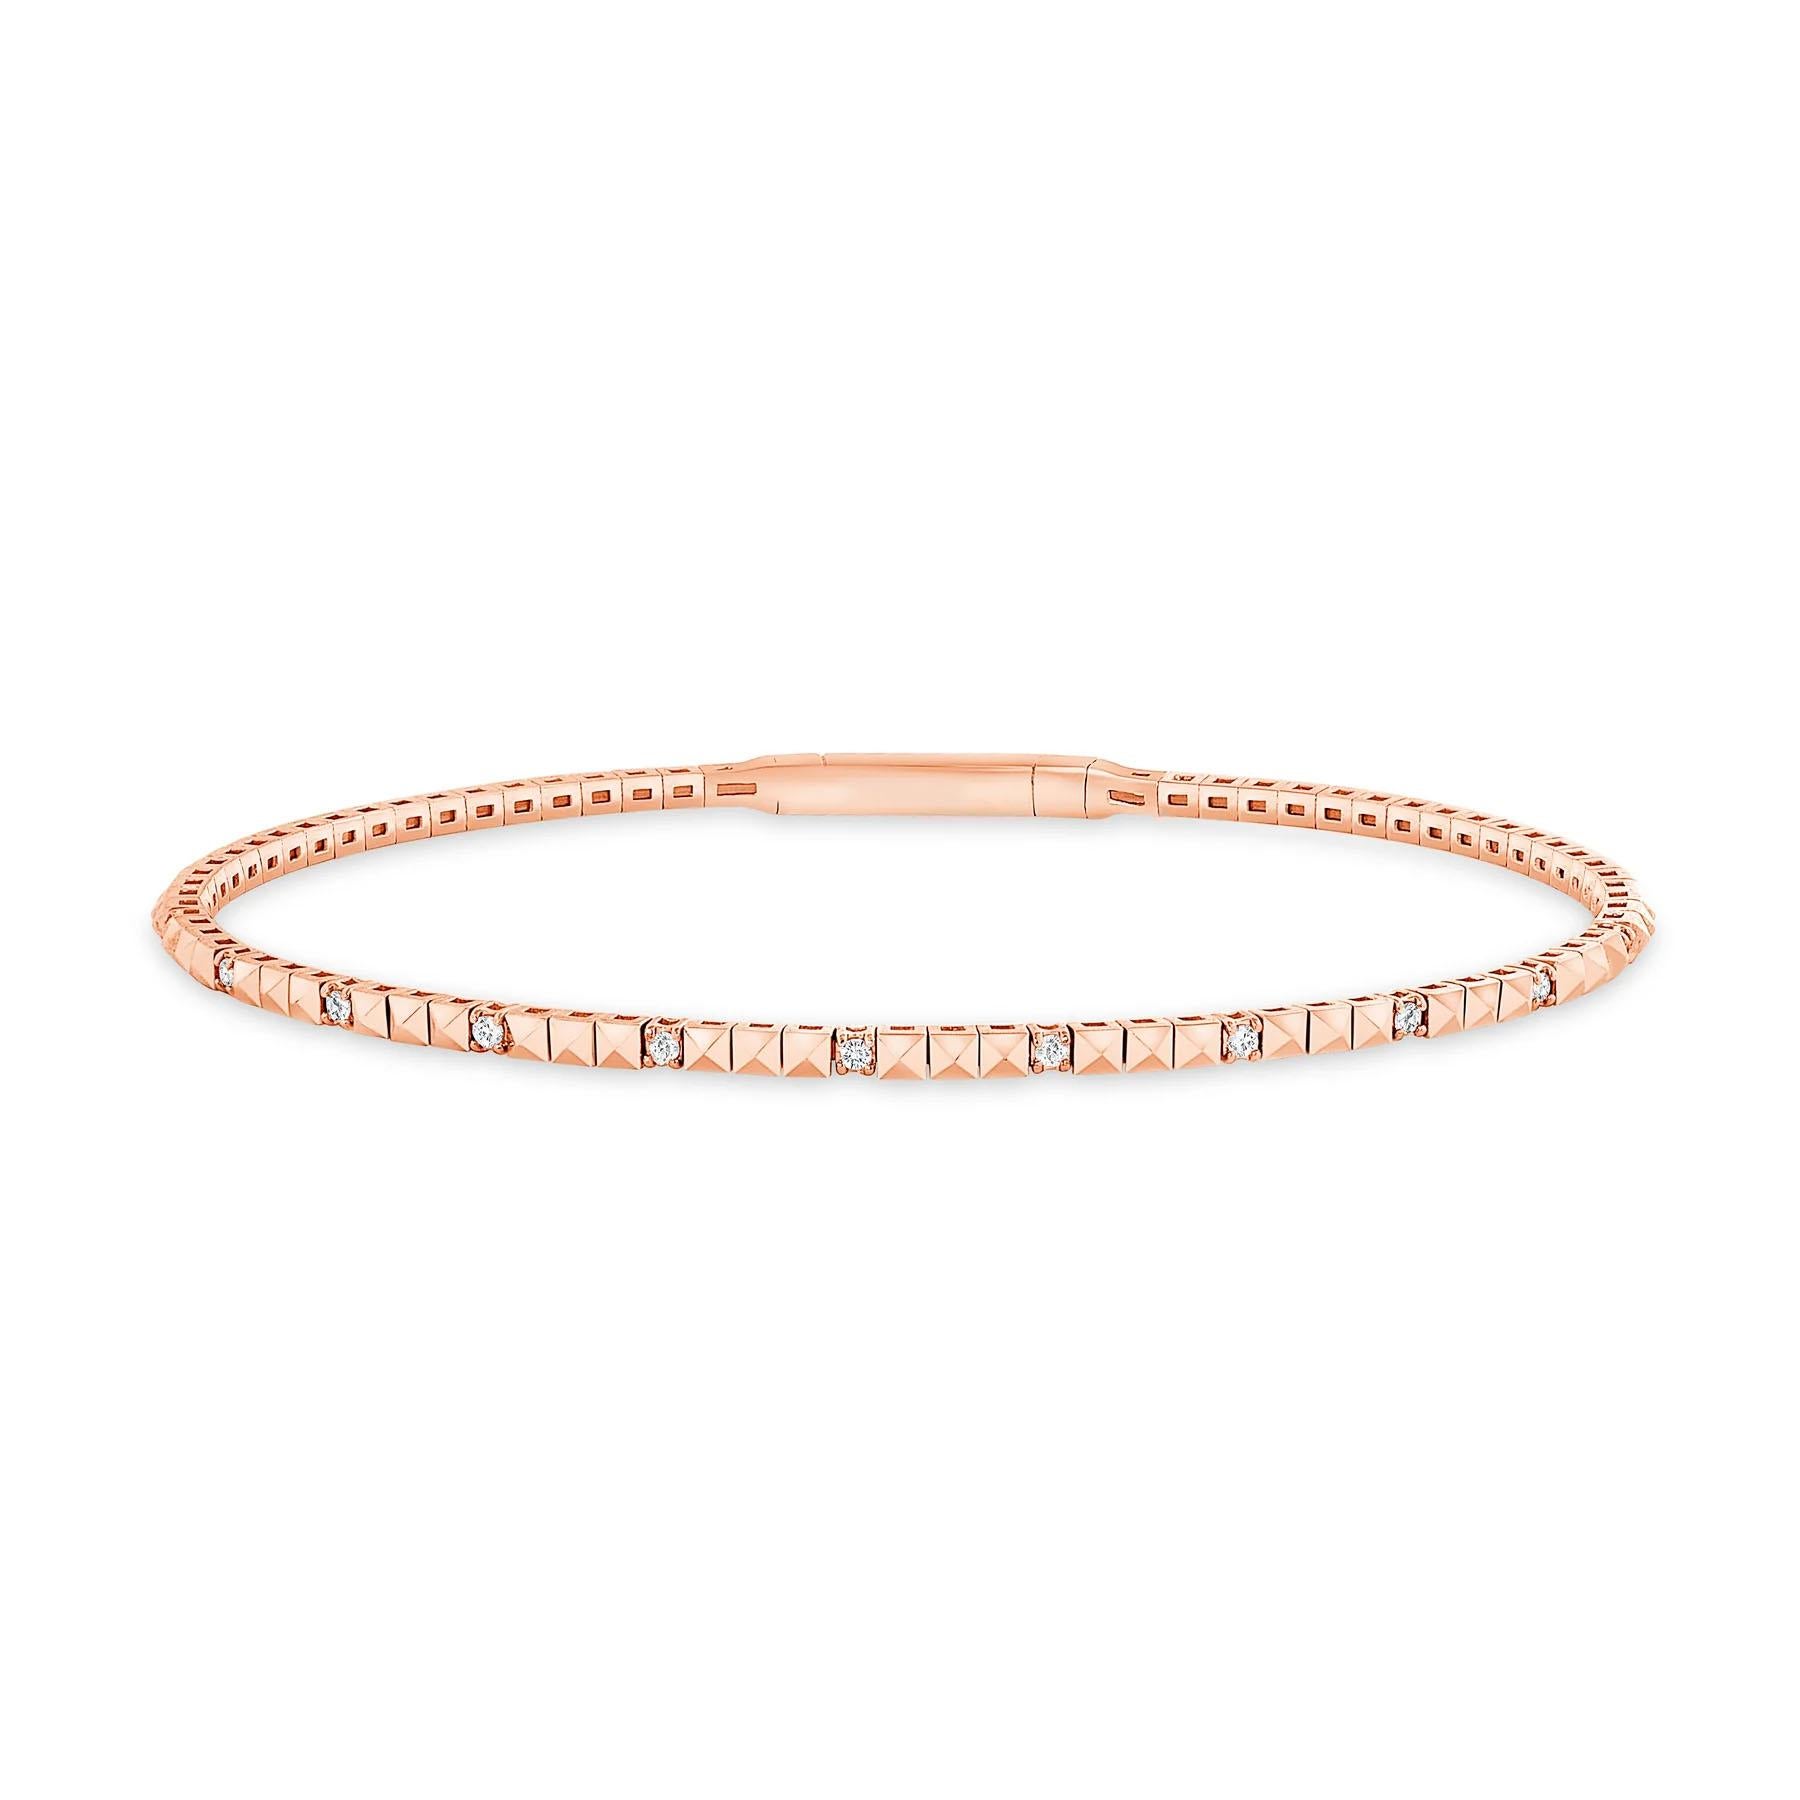 This diamond tennis bangle features beautifully cut round diamonds set gorgeously in 14k gold

Bracelet Information
Metal : 14k Gold
Diamond Cut : Round Natural Diamond
Total Diamond Carats : 0.8 ct
Diamond Clarity : VS-SI
Diamond Color : F-G
Color